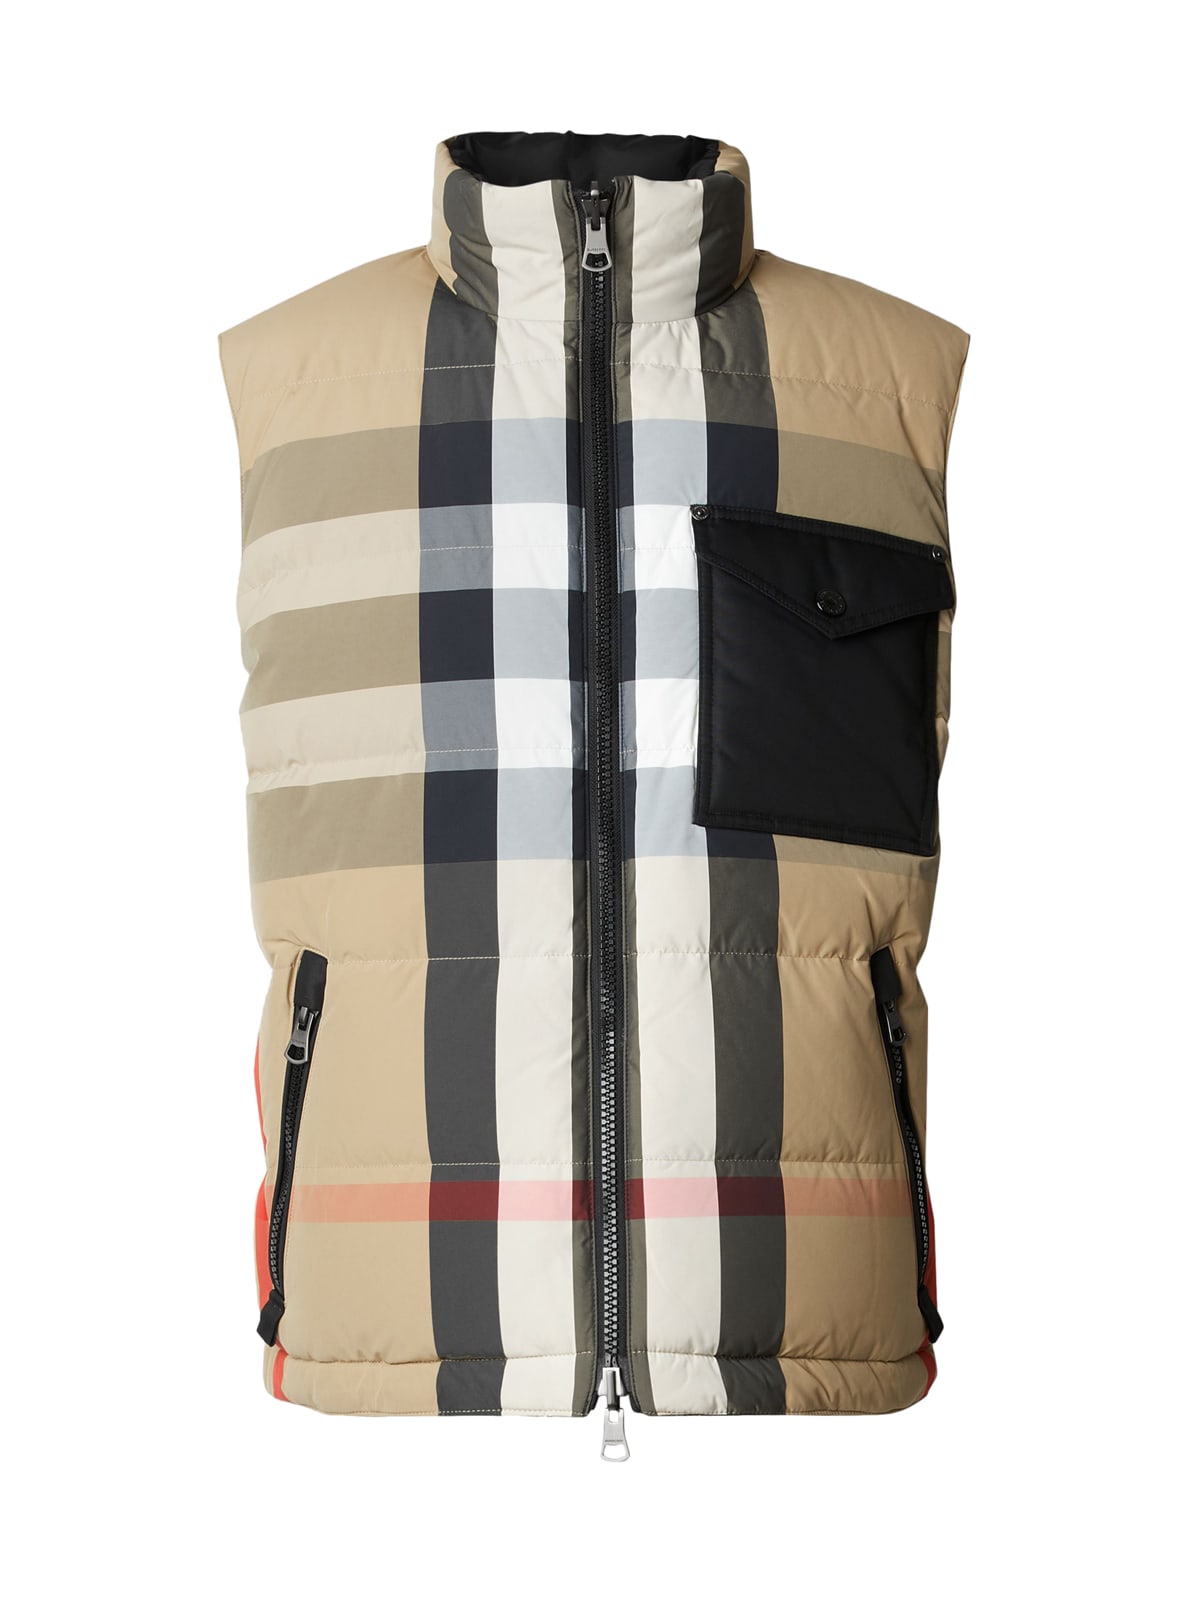 BURBERRY ROMFORD GILET,8032997 A7028 ARCHIVE BEIGE